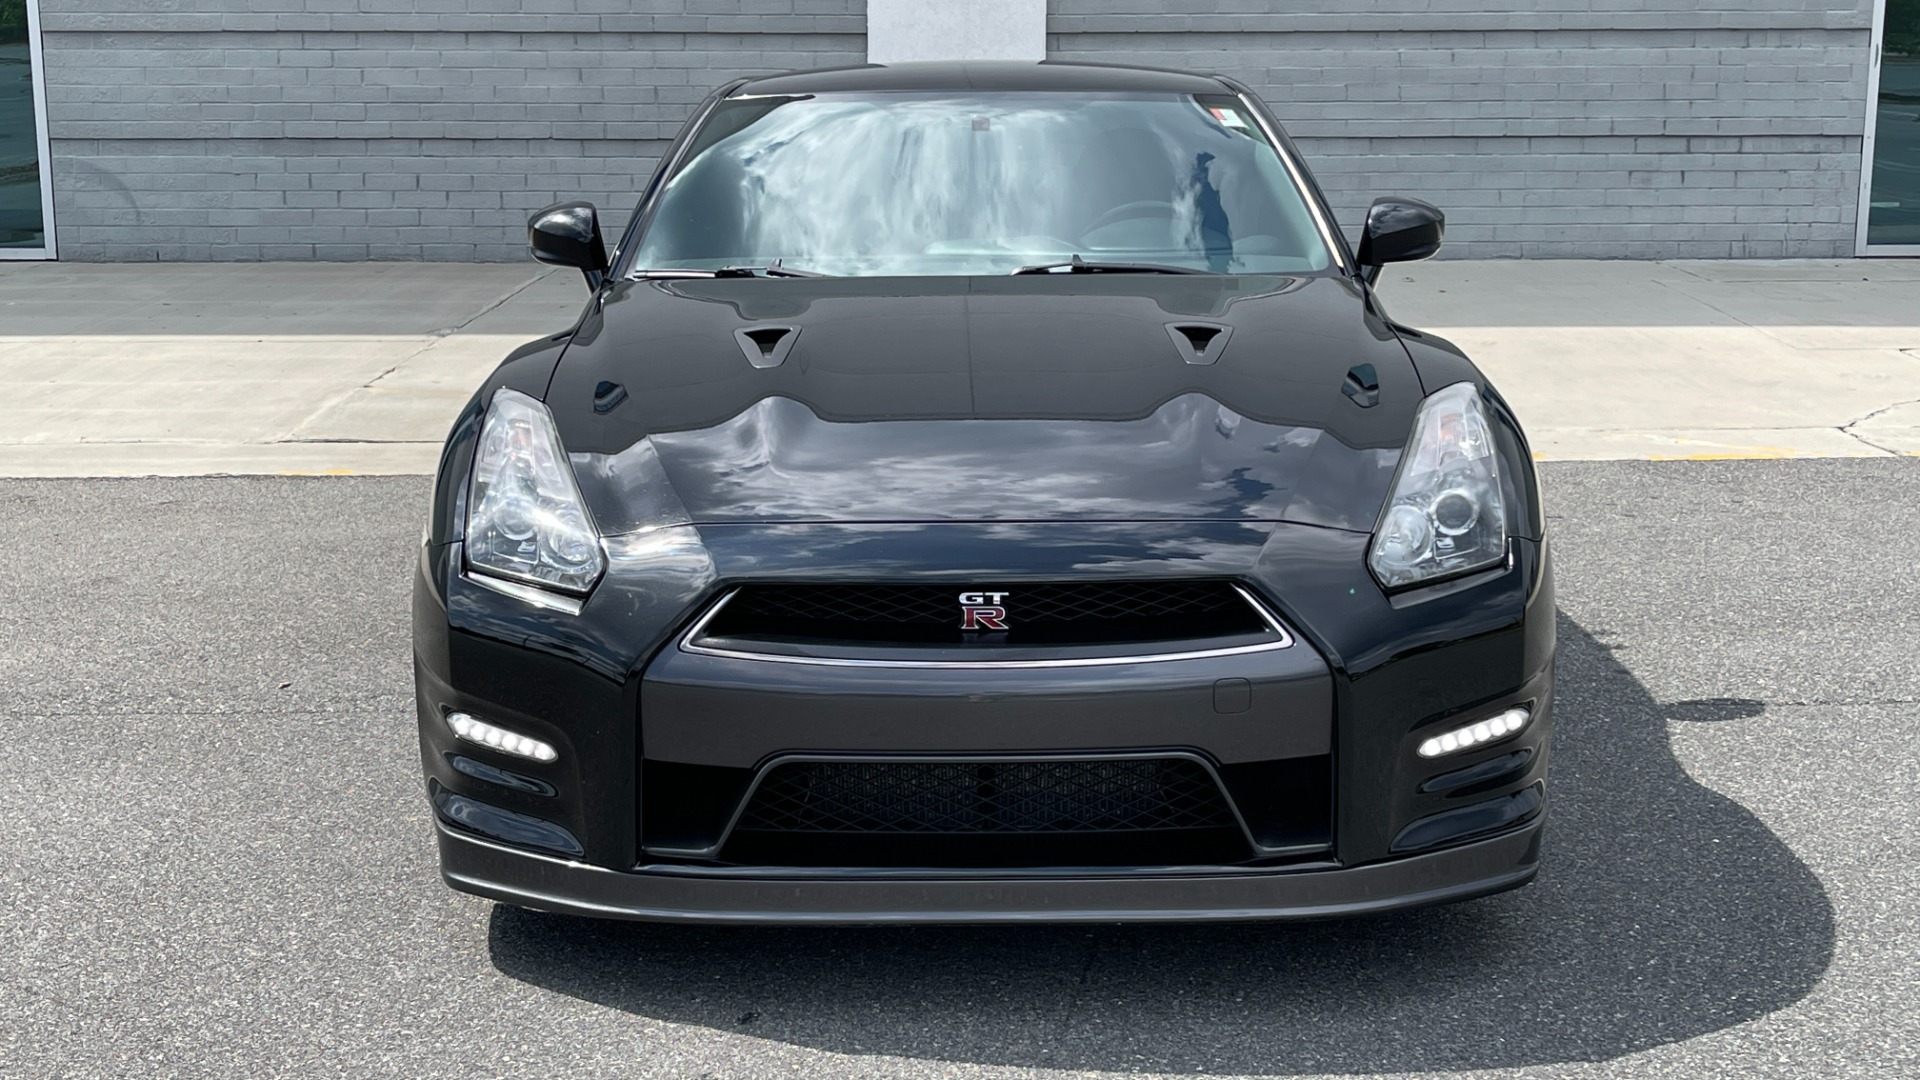 Used 2013 Nissan GT-R PREMIUM COUPE / 3.8L TWIN-TURBO / 6-SPD AUTO / COLD WTHR PKG / CAMERA for sale $70,995 at Formula Imports in Charlotte NC 28227 11